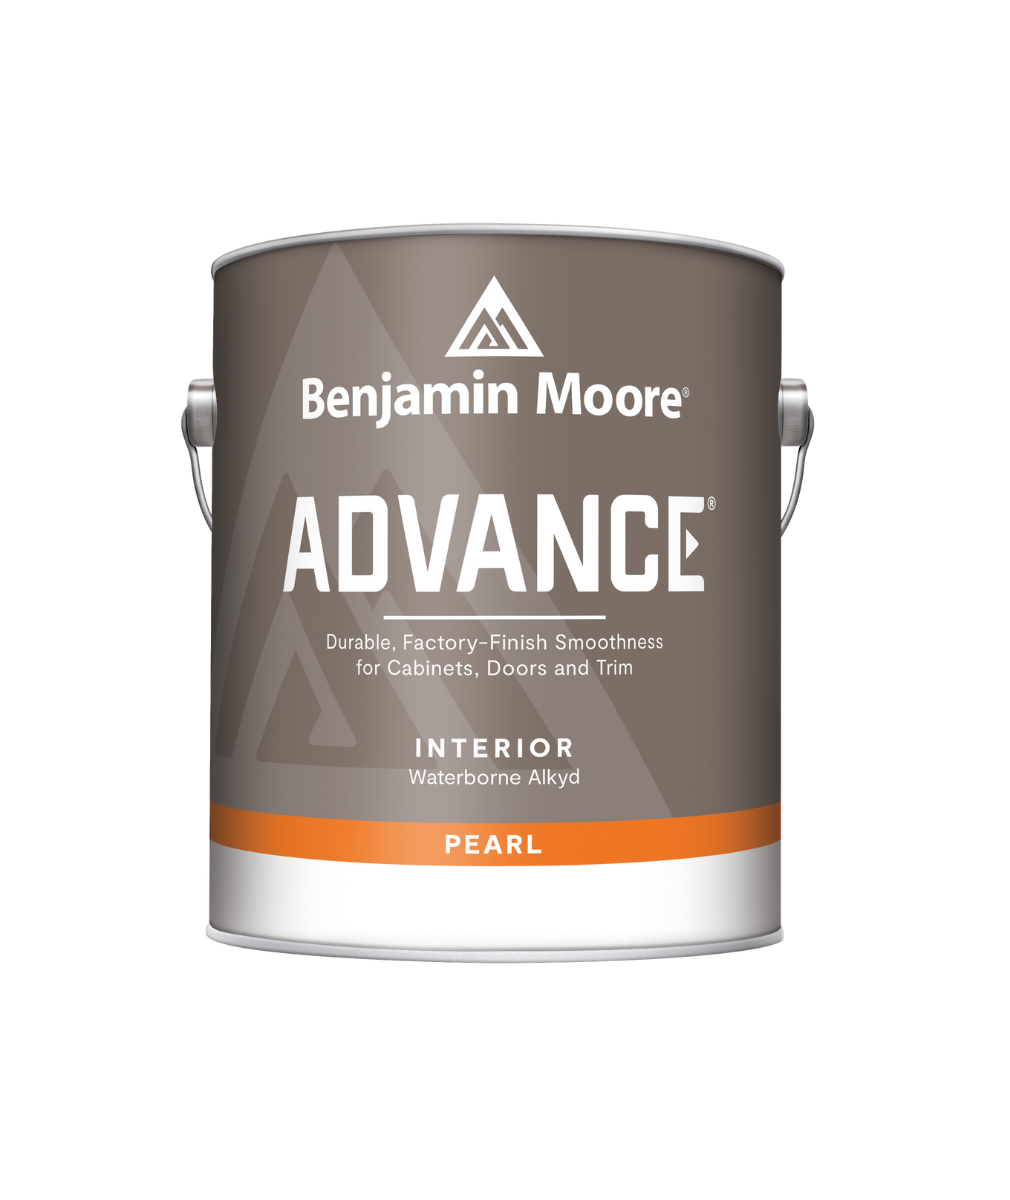 Benjamin Moore Advance Satin Paint available at JC Licht.